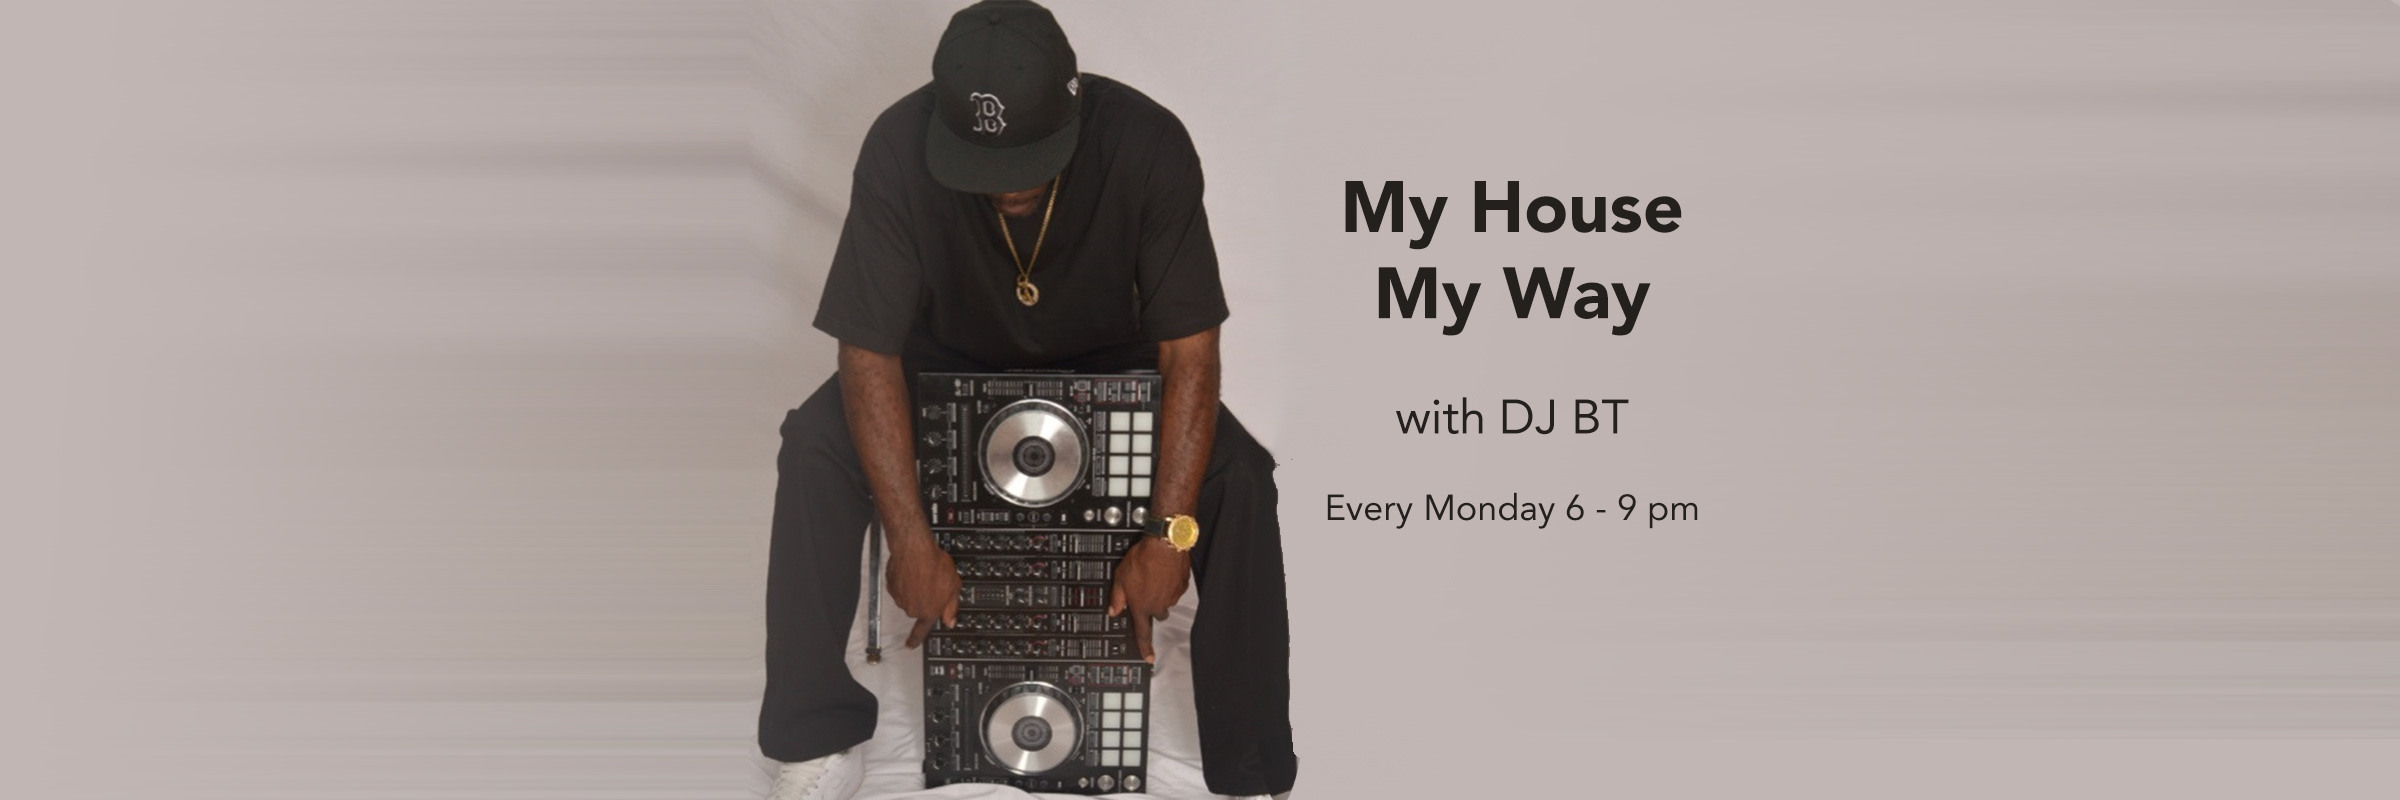 DT BT - My House, My Way - Every Monday 6-9pm